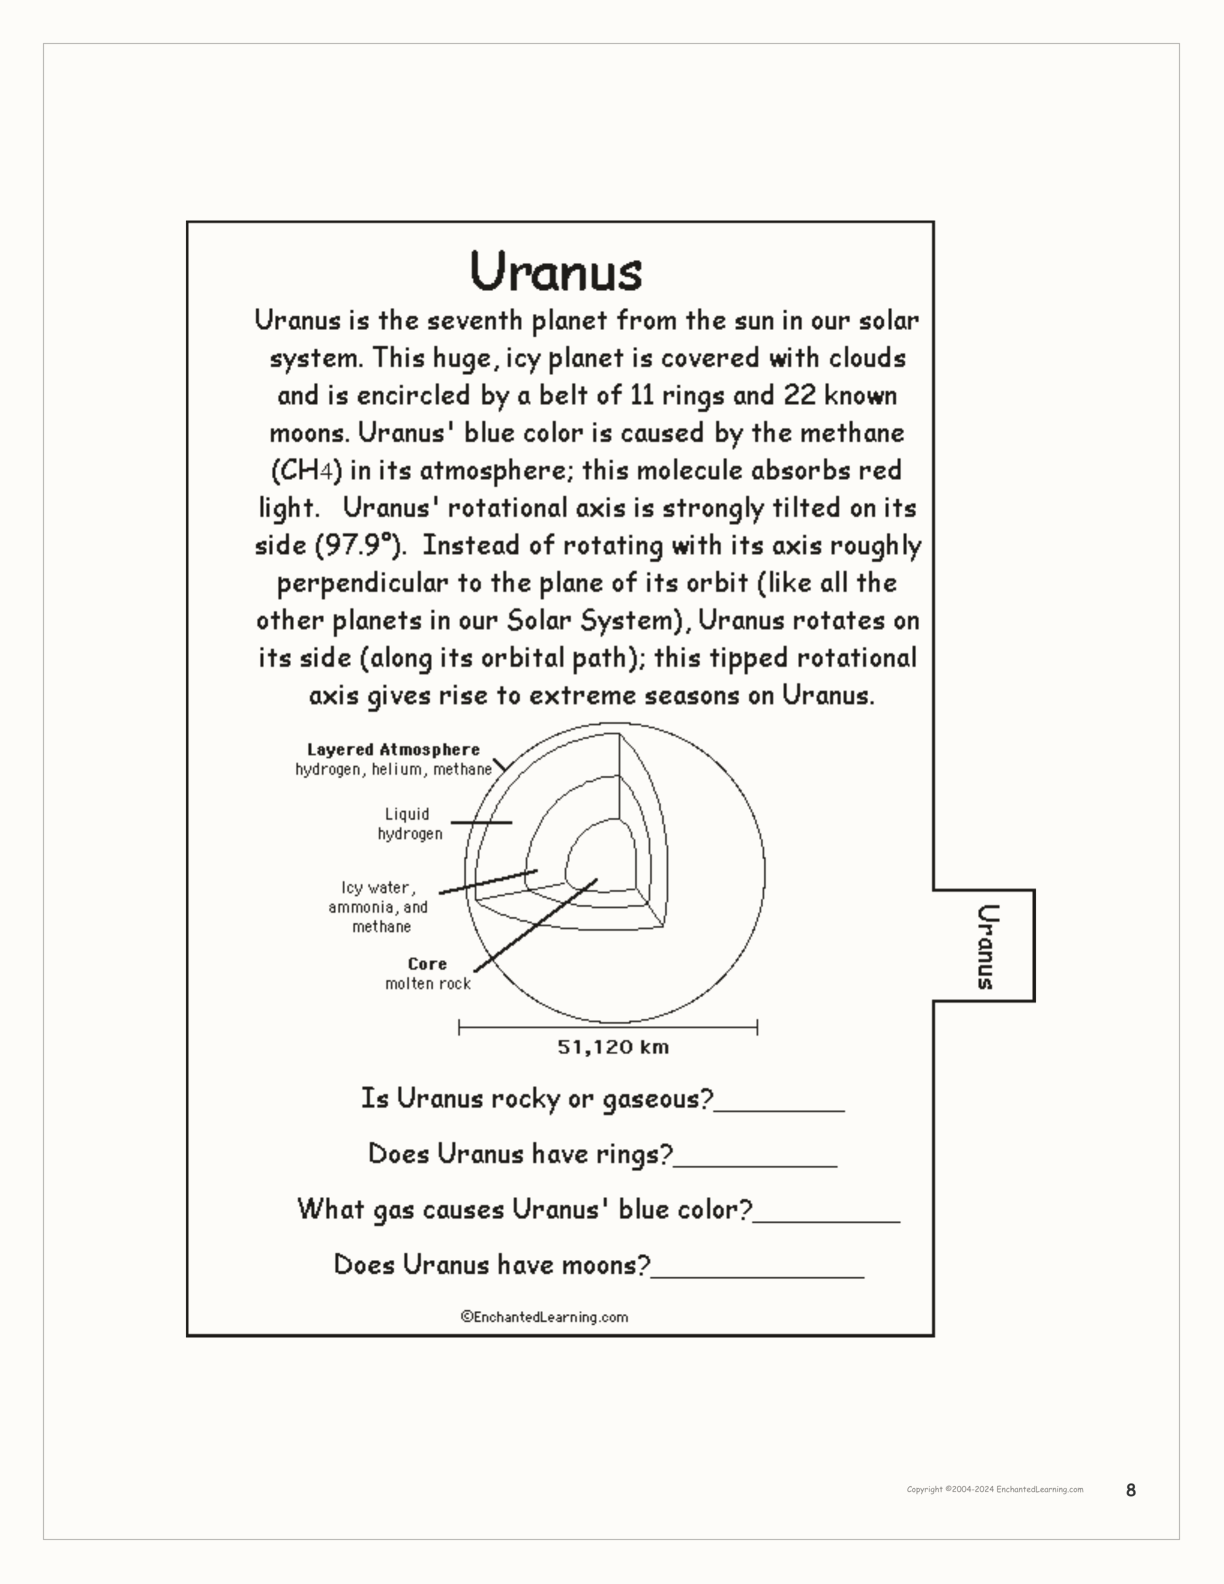 The Planets of our Solar System Book interactive printout page 8